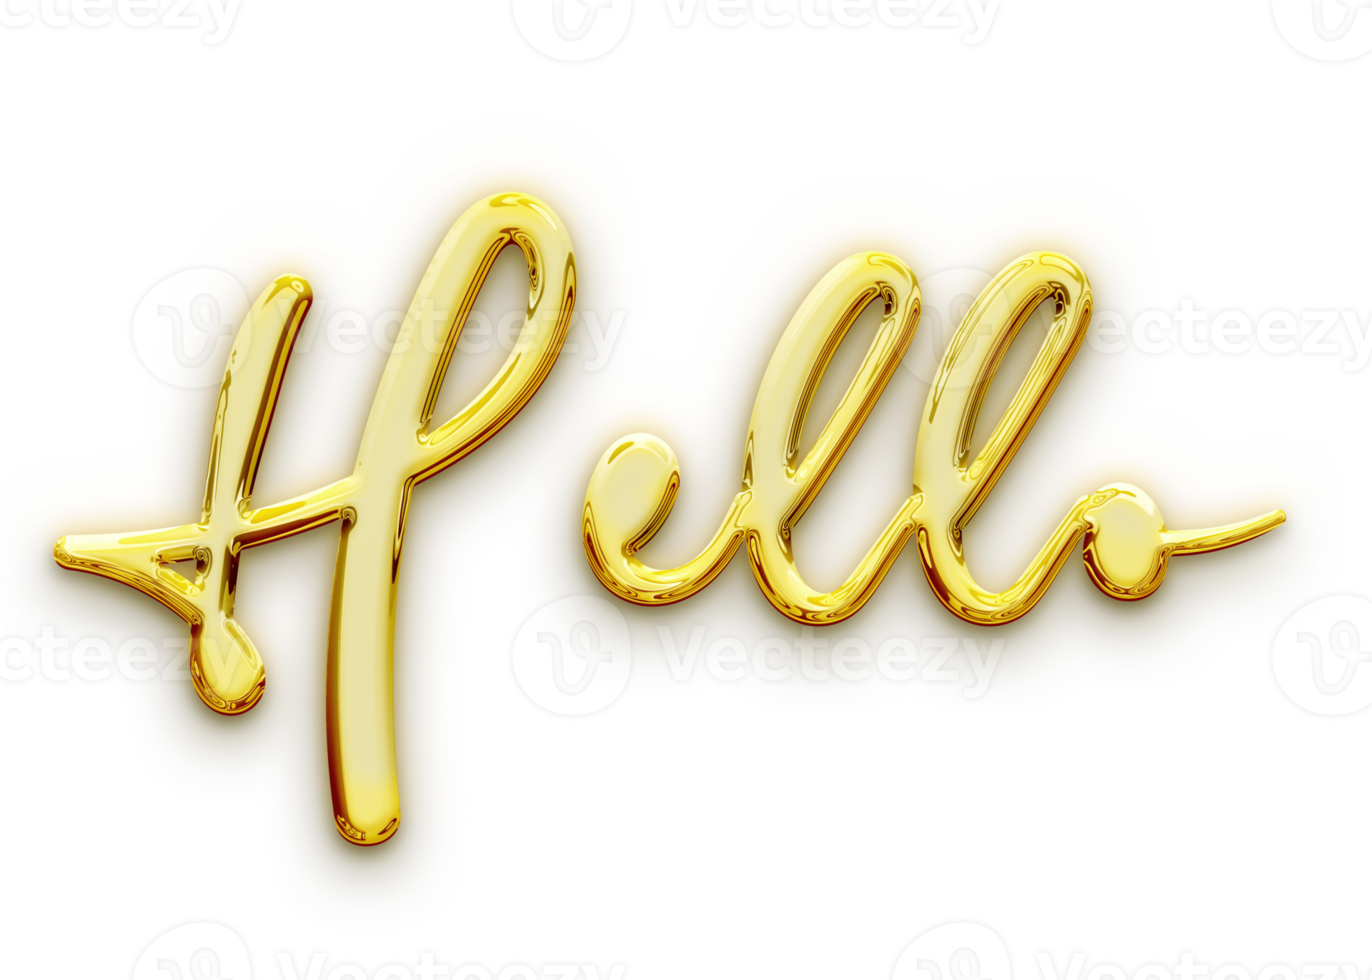 Golden volumetric 3D Text of the inscription Hello isolated cut out png